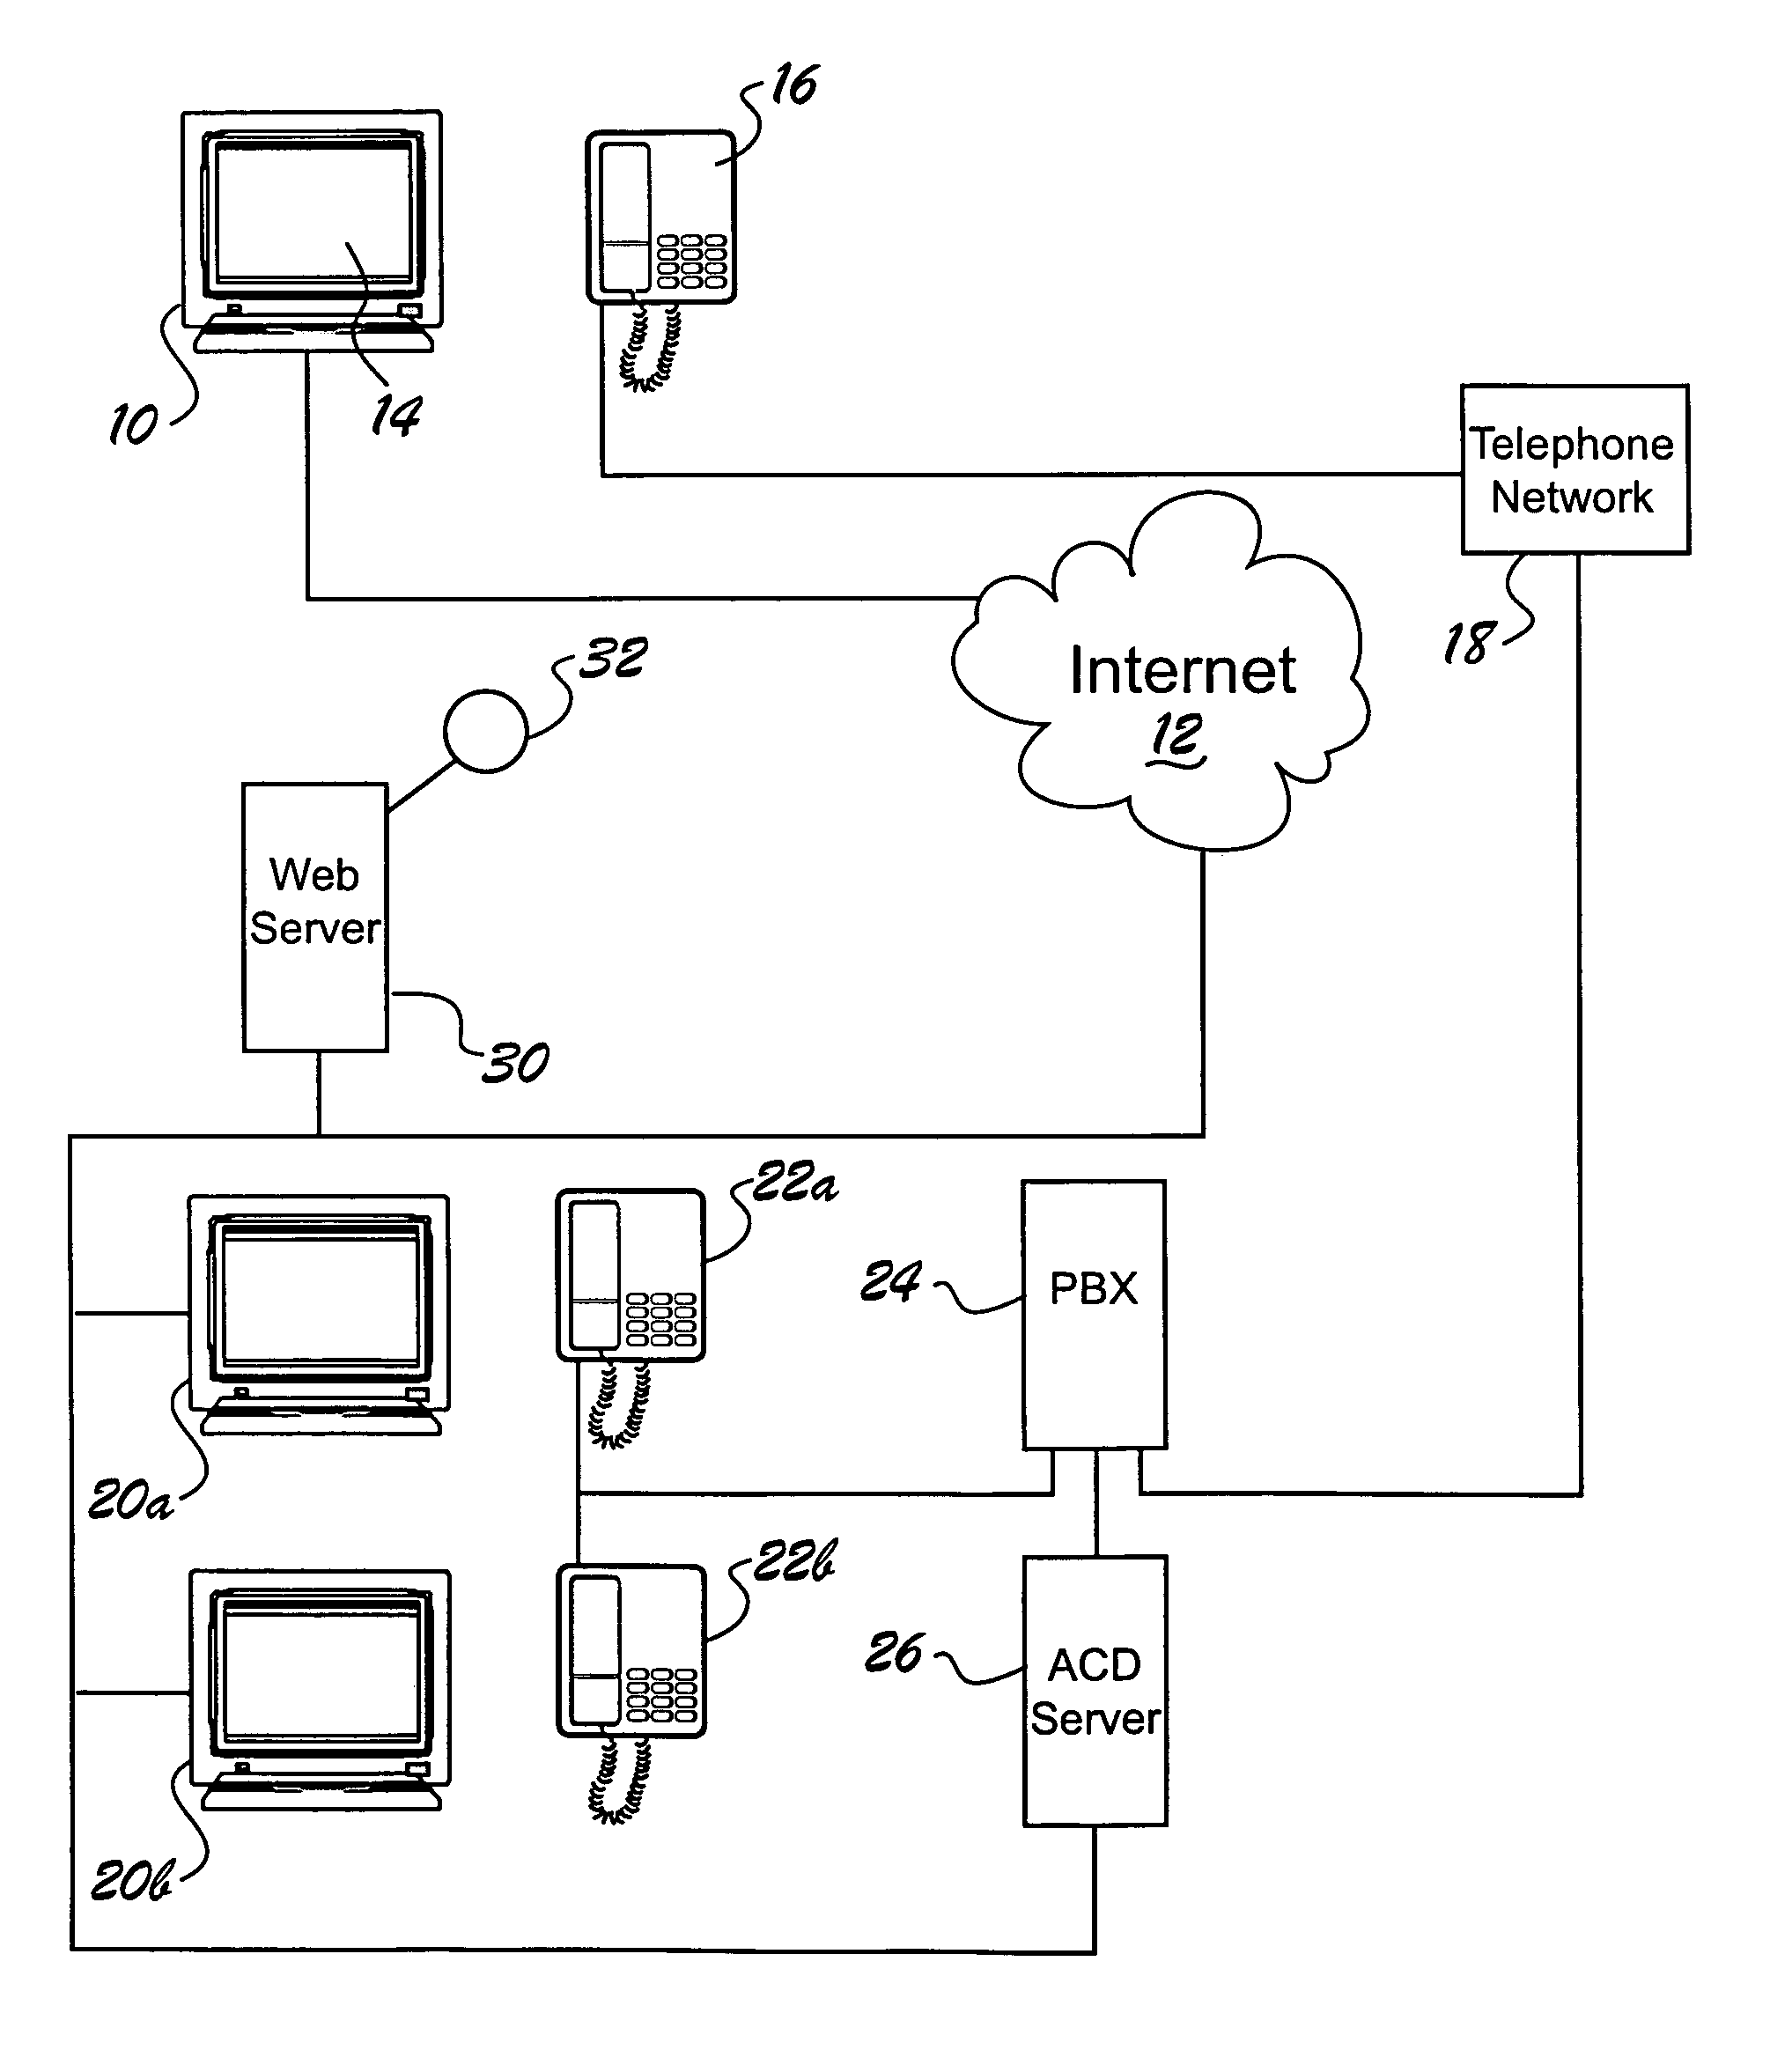 Web-content aware automatic call transfer system and process for mobile users and operators